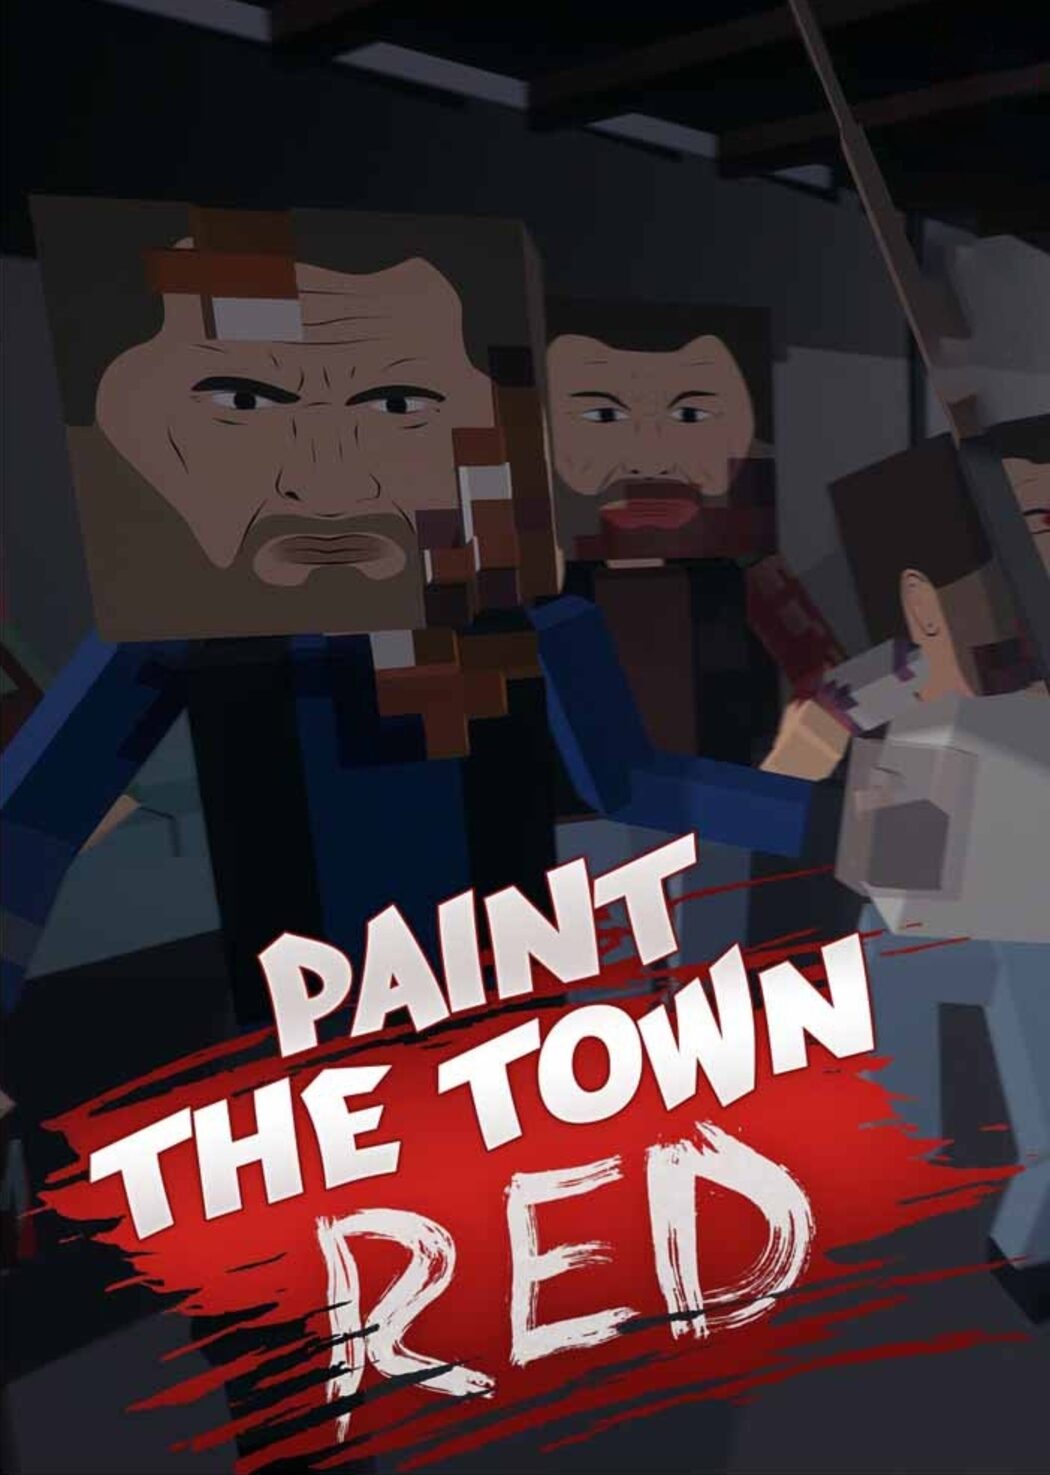 Paint the town на телефон. Red Town игра. Paint the Town Red ключ. Бен зе Таун ред. Игра Paint the Town Red.